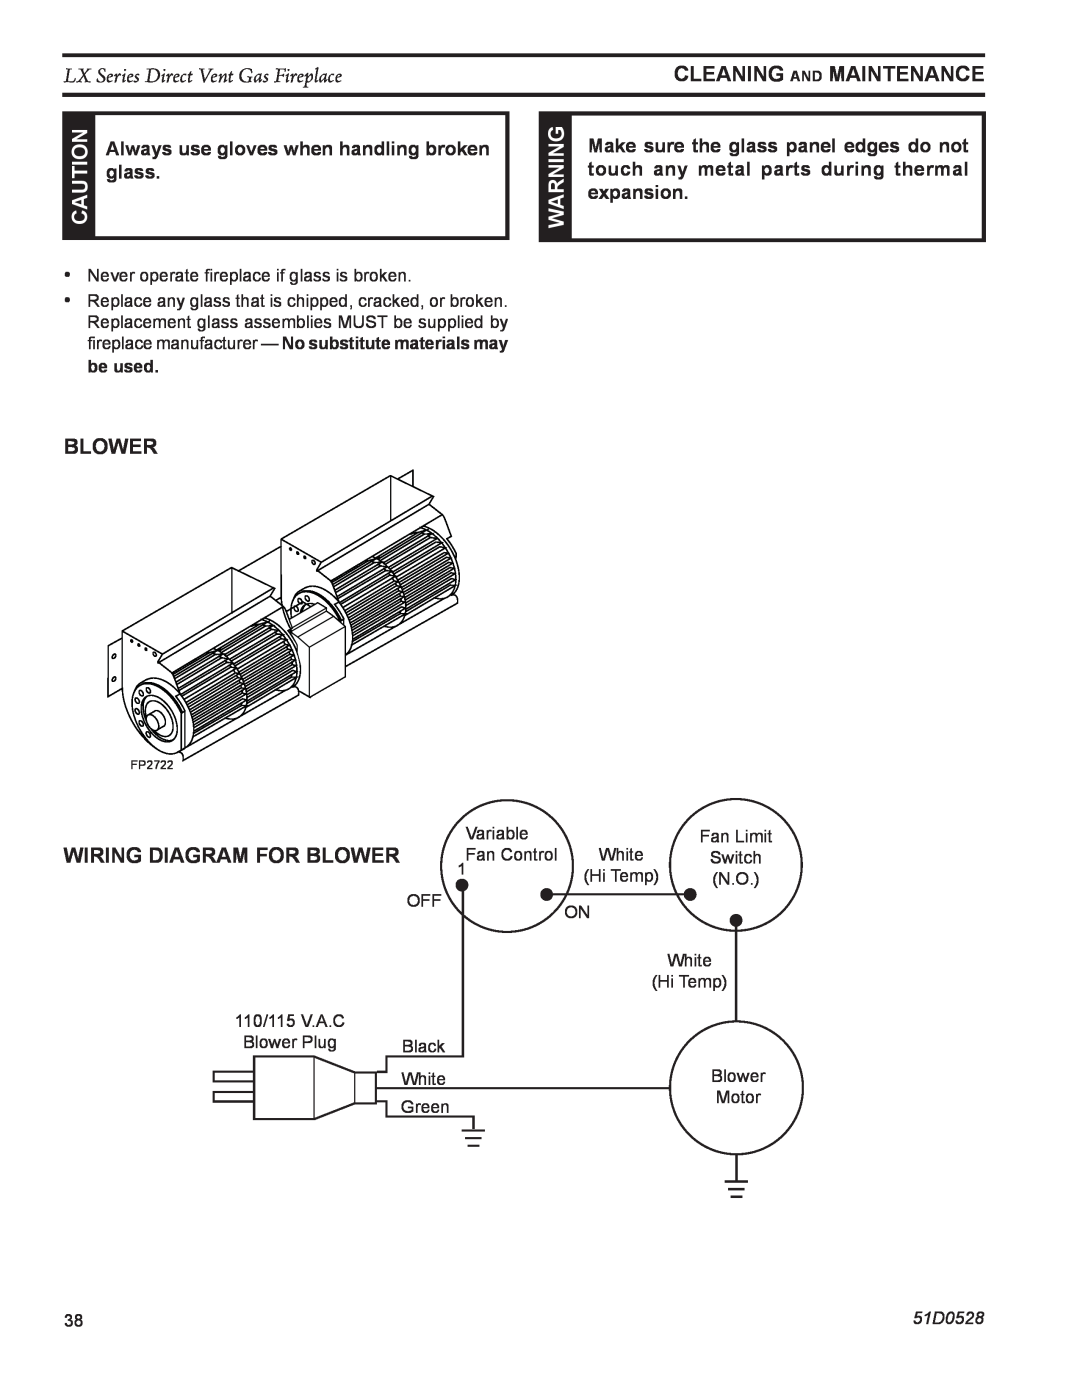 Monessen Hearth LX36DV Wiring Diagram For Blower, LX Series Direct Vent Gas Fireplace, cleaning and maintenance 